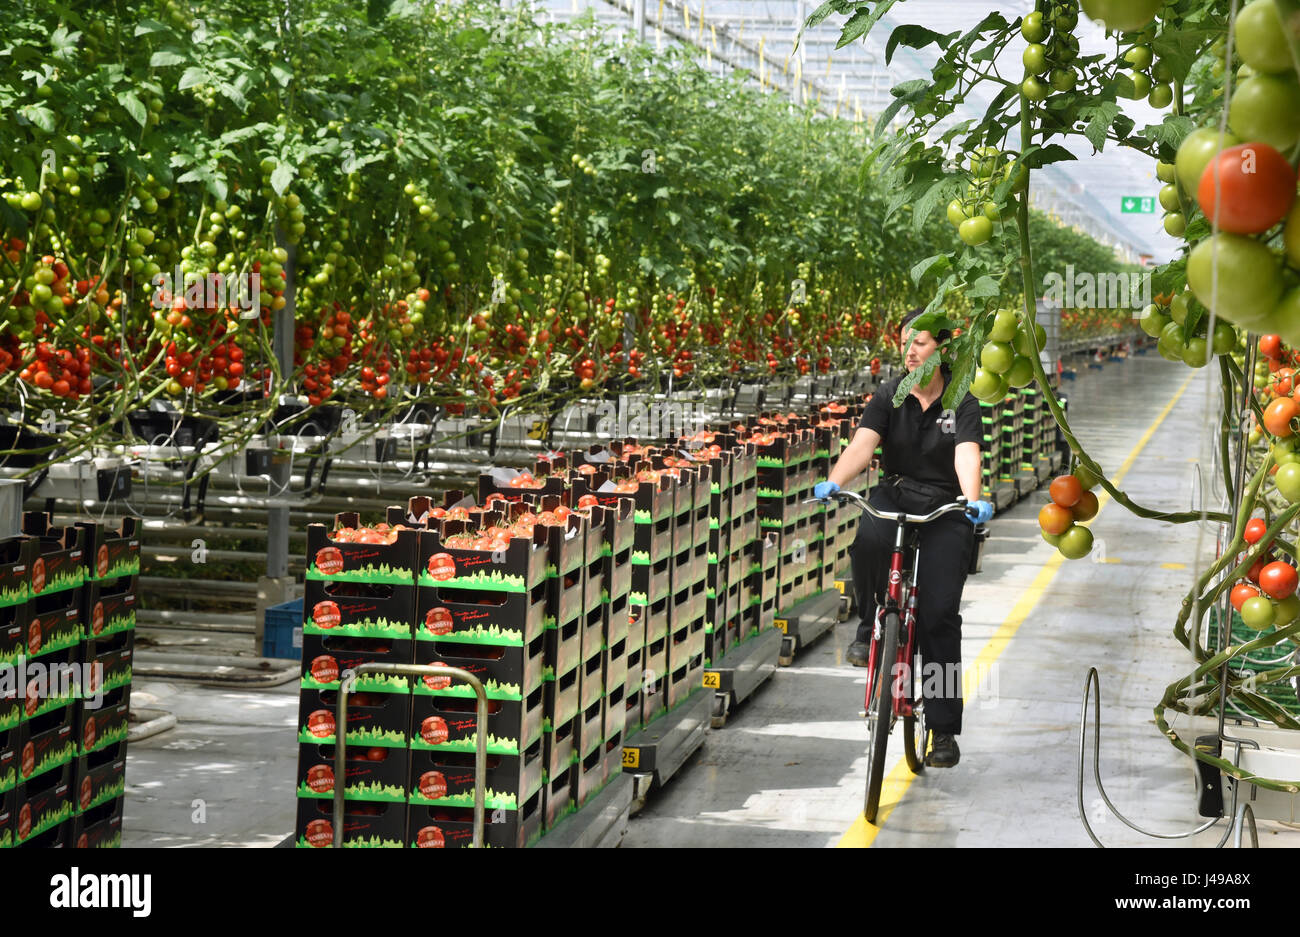 Tomatoes seen in boxes at the Wittenberg Gemuese GmbH in Apollensdorf,  Germany, 10 May 2017. Some 40 to 50 tonnes of vine, cocktail and snack  tomatoes grow on some 600,000 tomato plants